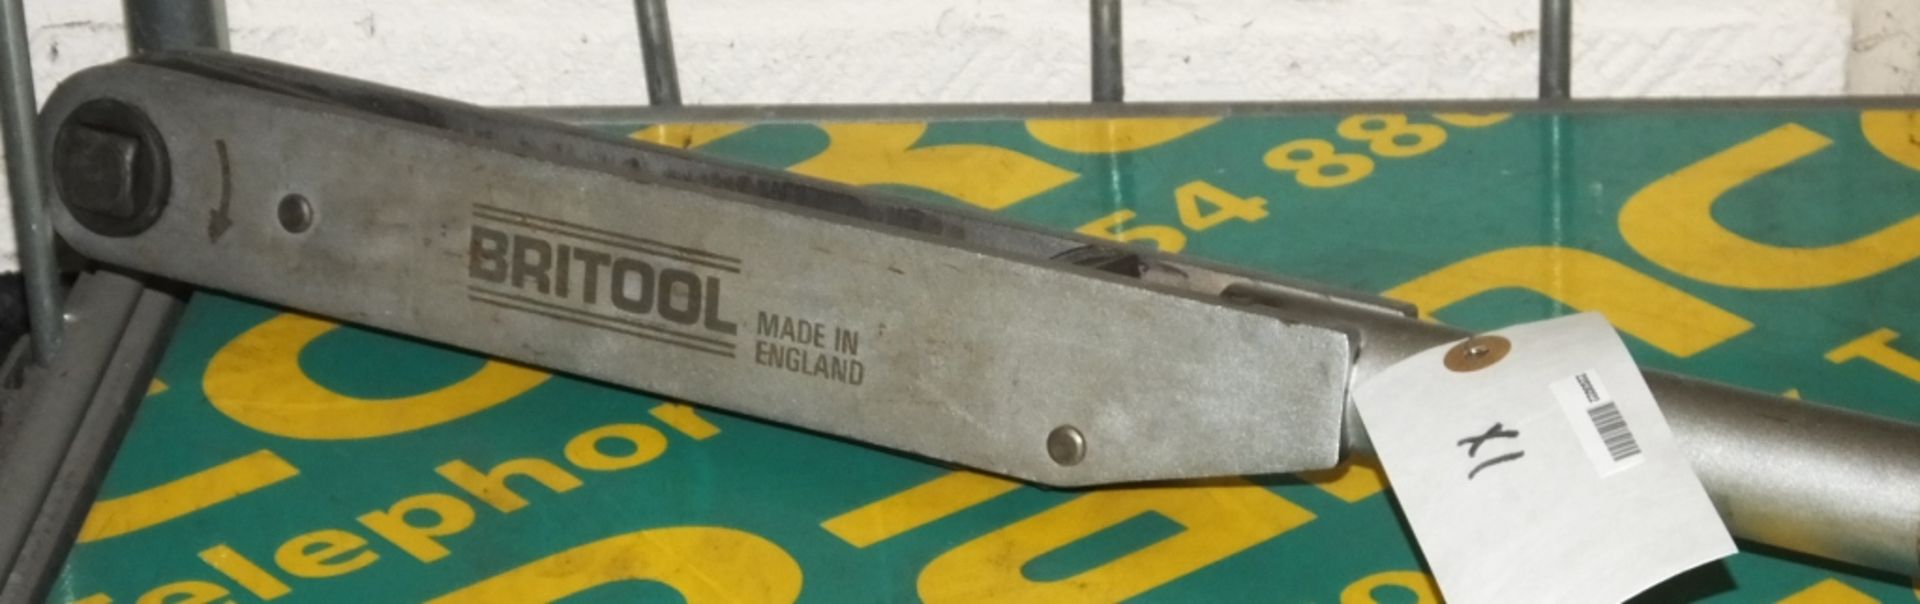 Britool Torque Wrench - Image 2 of 2